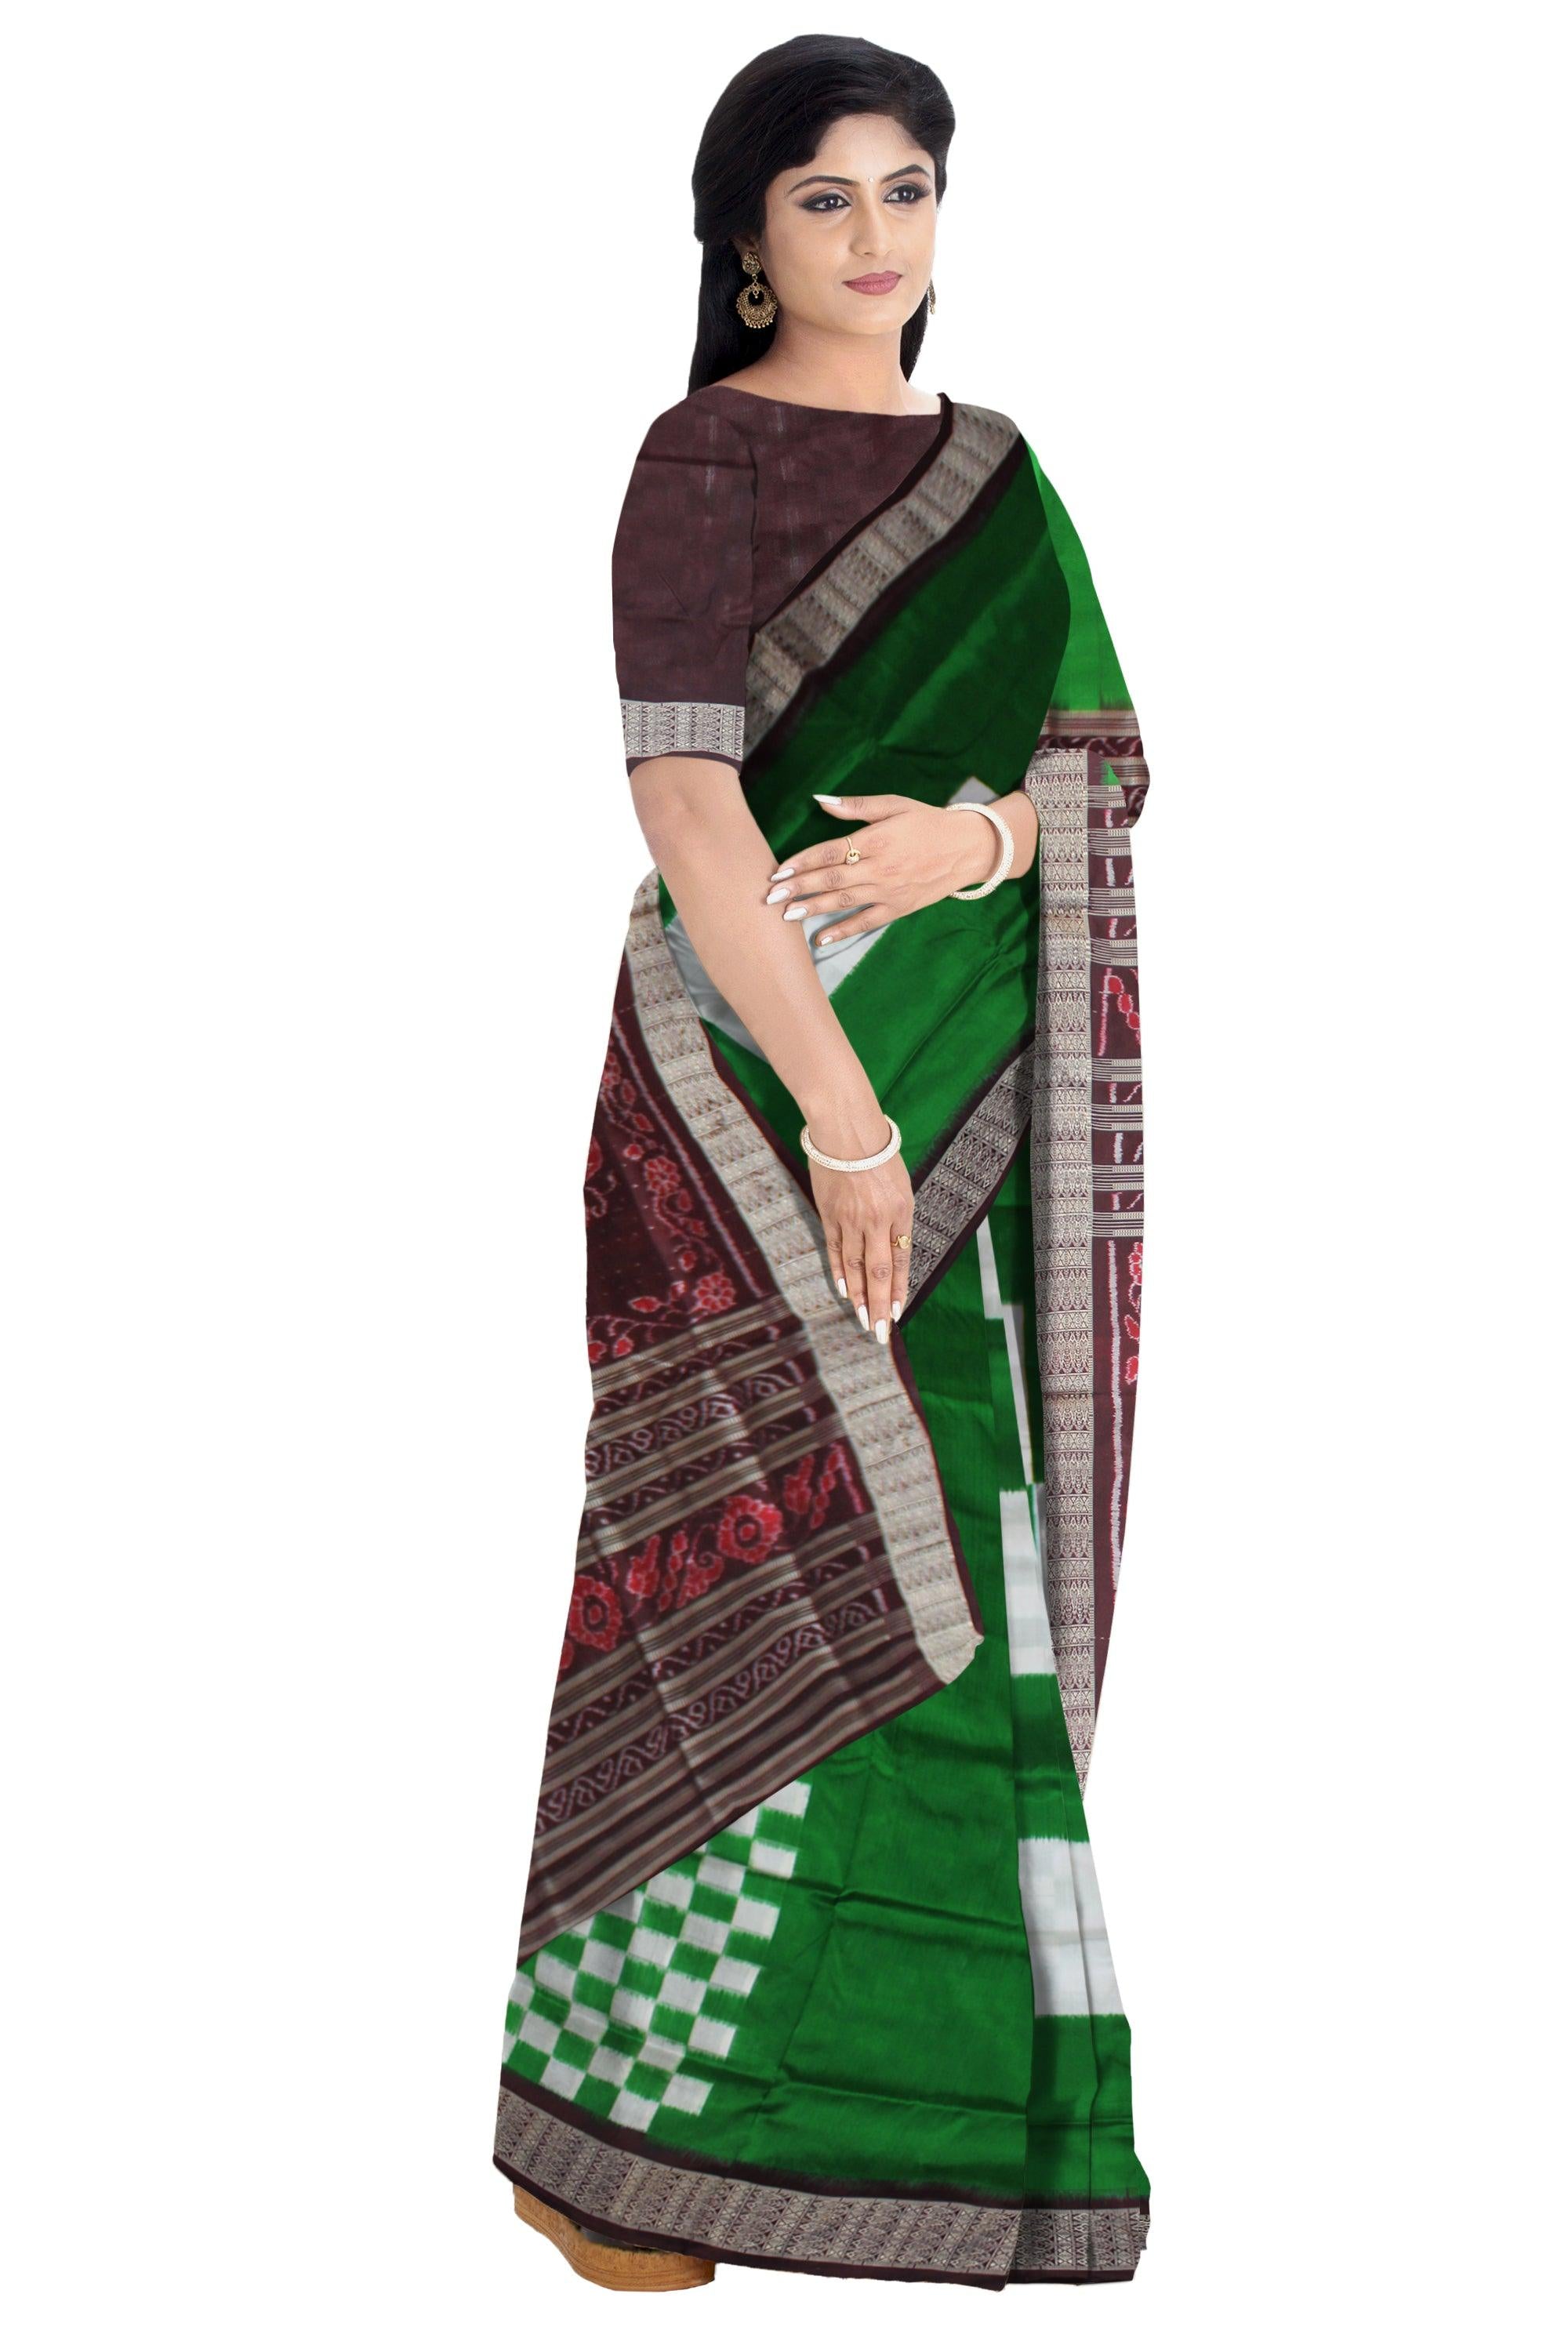 NEW COLLECTION BIG PASAPALI PATTERN PURE SILK SAREE IN GREEN COLOR BASE, COMES WITH BLOUSE PIECE. - Koshali Arts & Crafts Enterprise